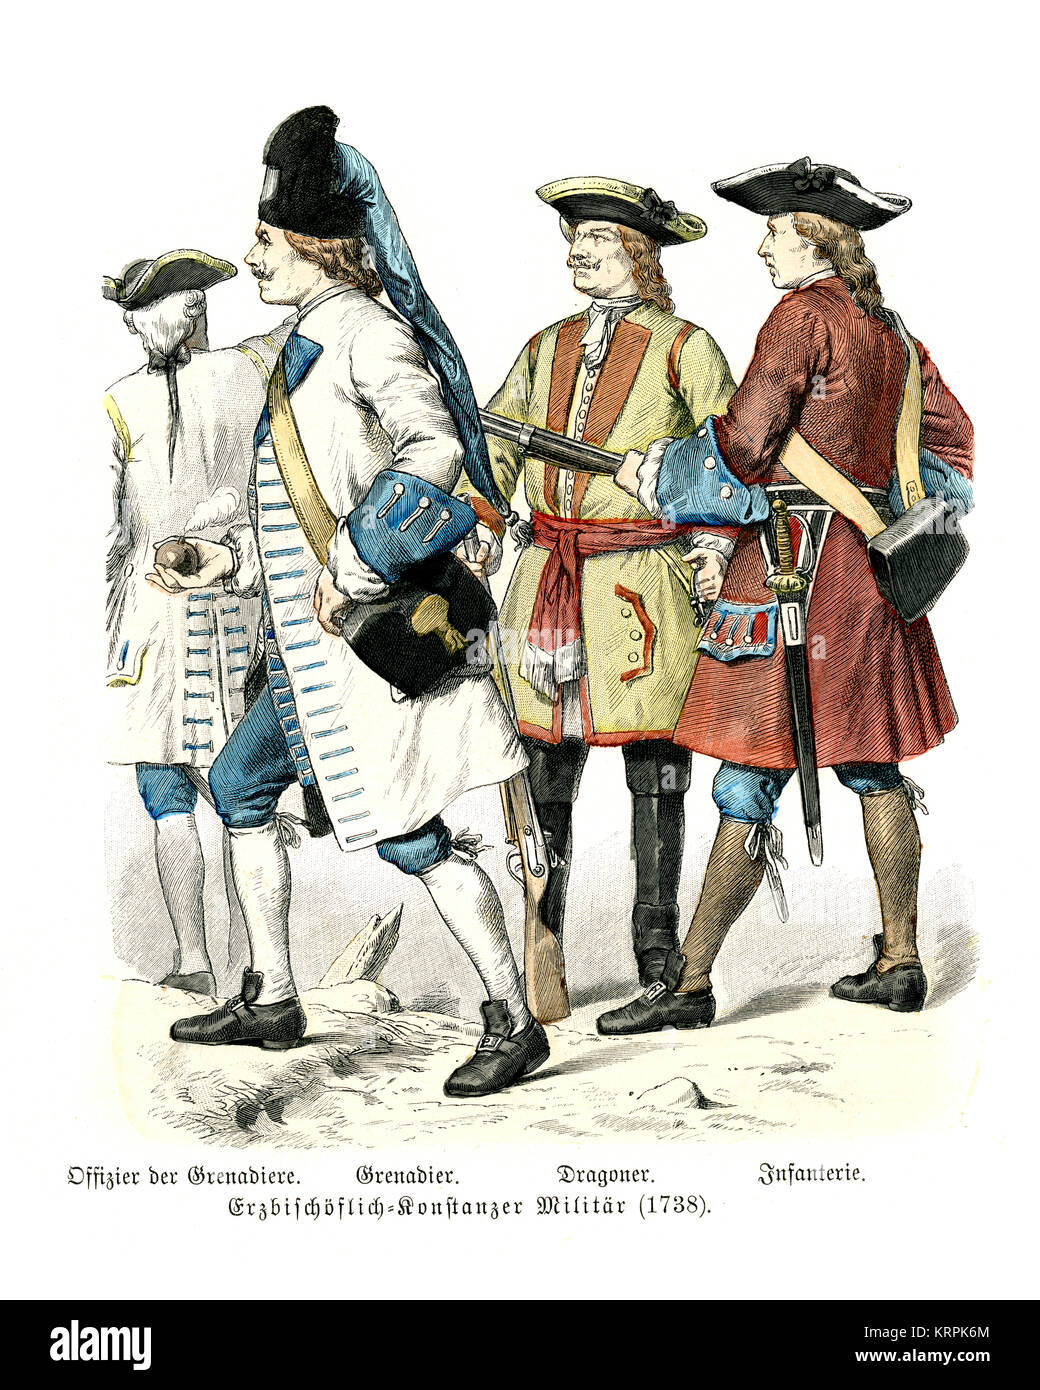 Vintage engraving of Miltary Uniforms 18th Century Bishopric of Constance, Officer, Grenadier, Dragoon, Infantry Stock Photo